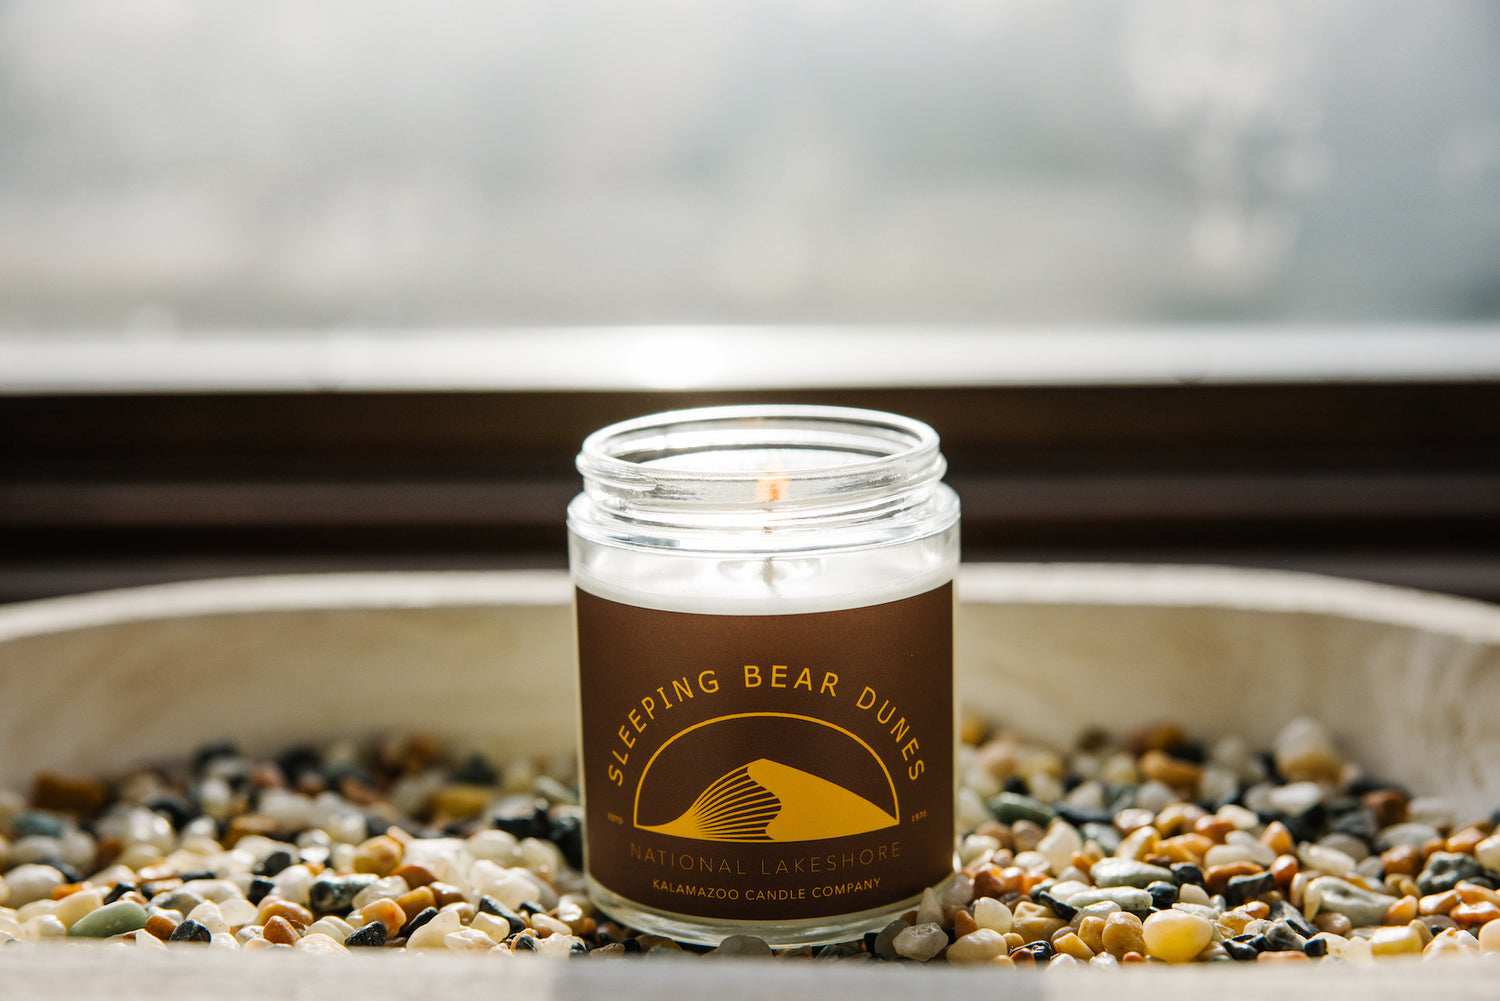 Sleeping Bear Dunes Candle on a bed of stones